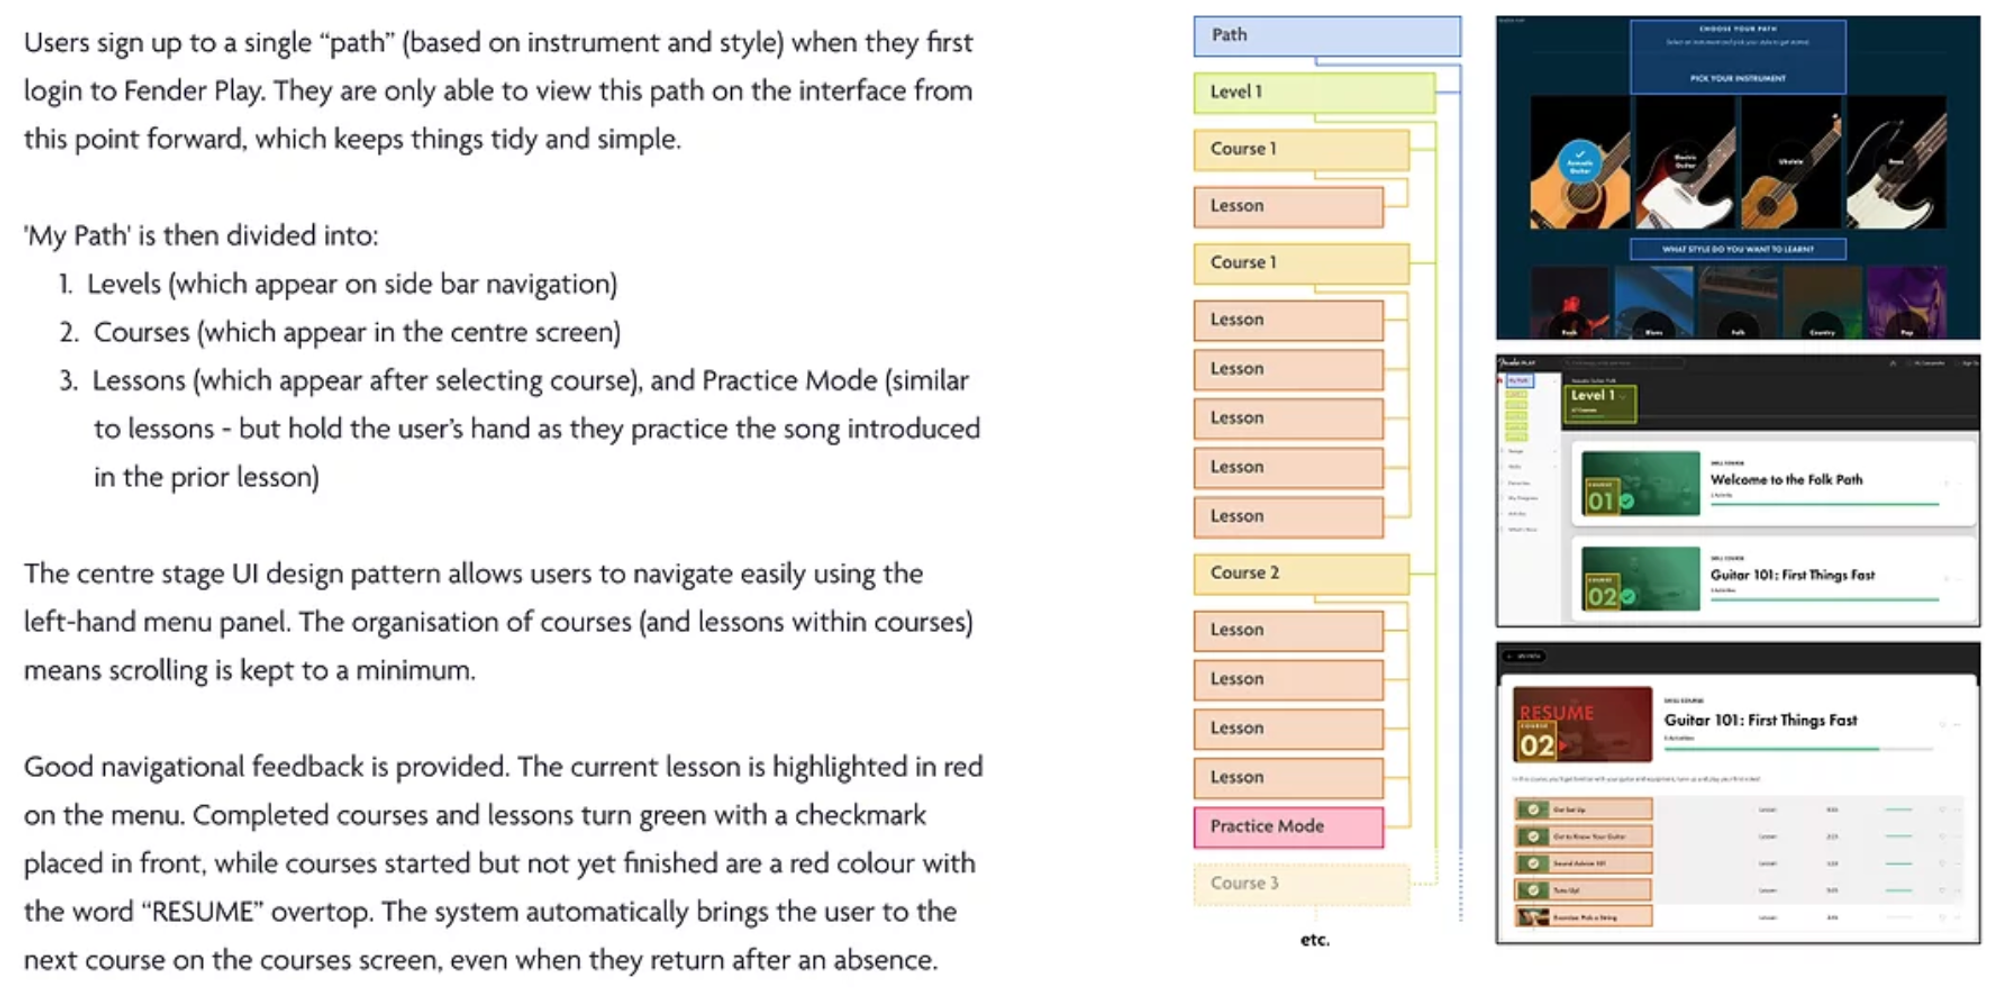 Figure 2: A screenshot of the Justin Guitar insight report. This page is an analysis of the FenderPlay user experience and breaks down the lesson structure, design patterns and navigational experience.